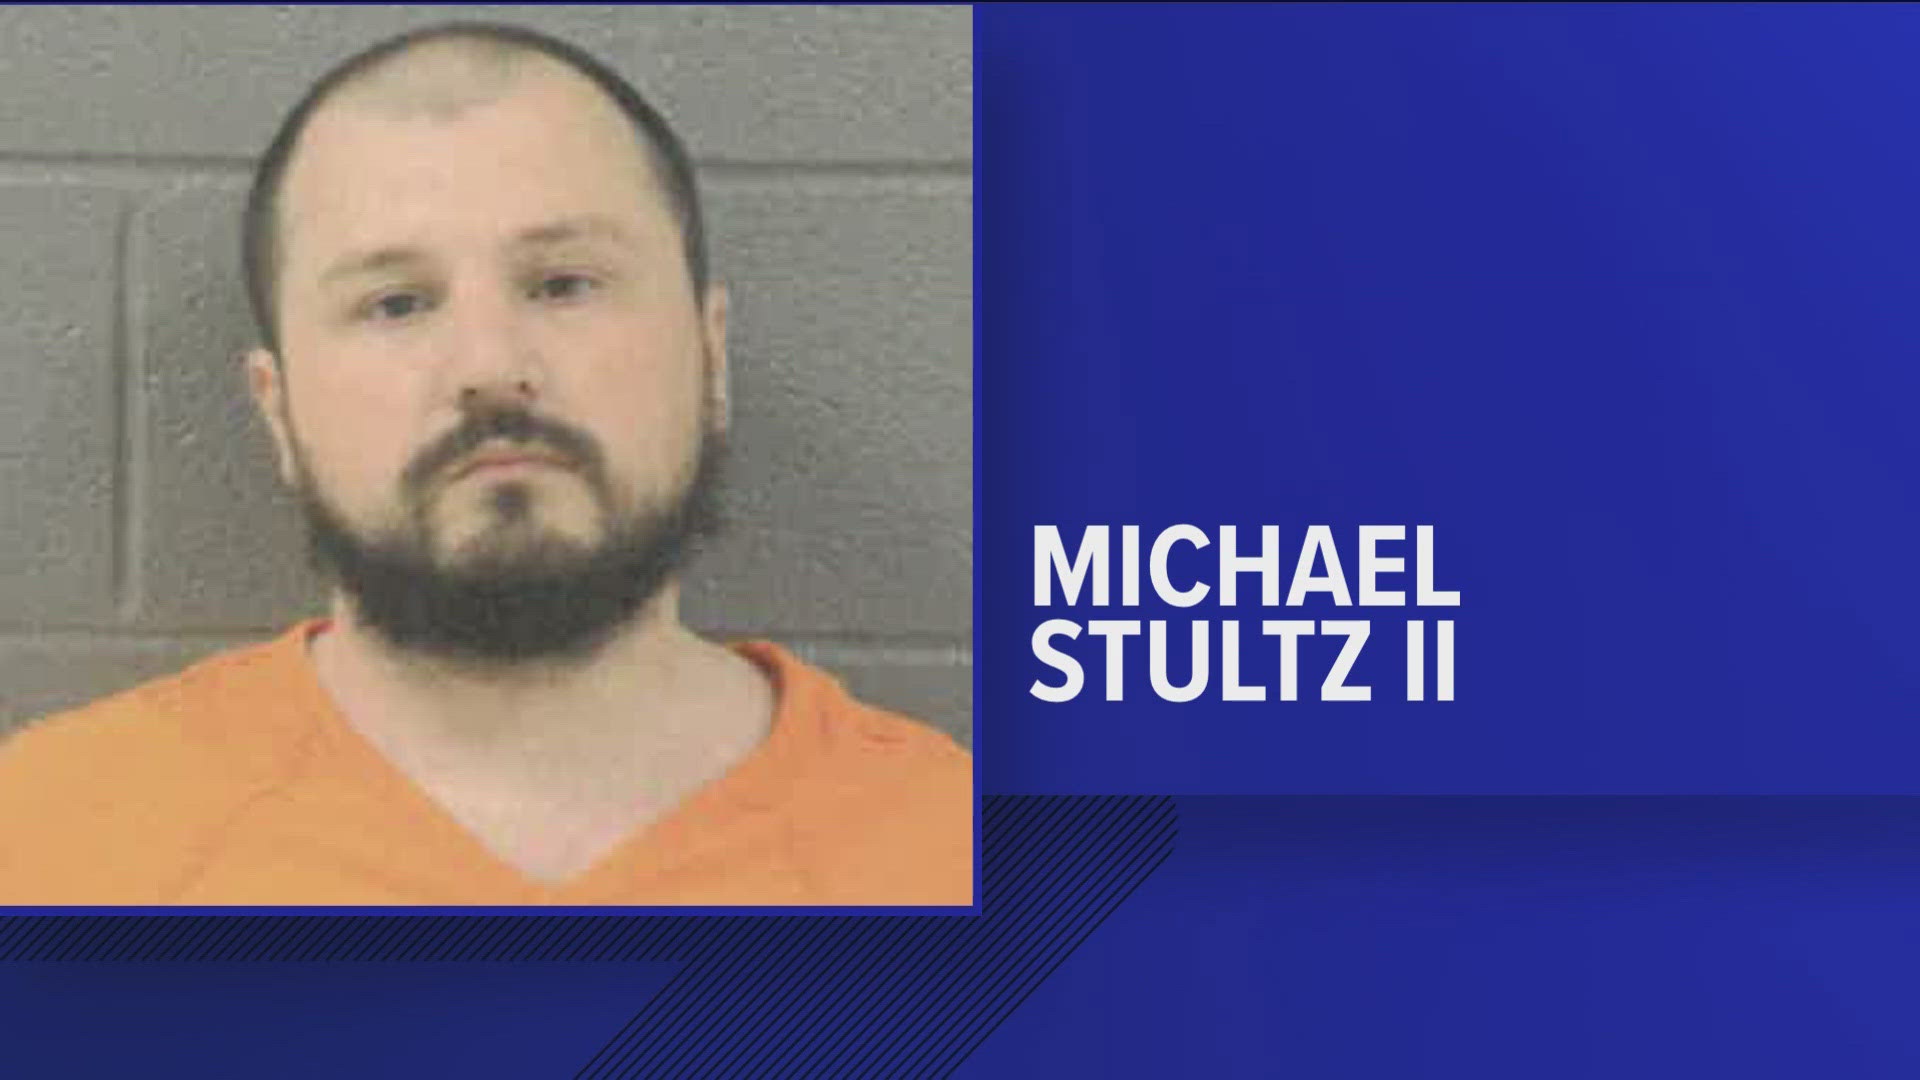 Michael Stultz II was accused of sexually abusing two children starting in 2020, court documents said.